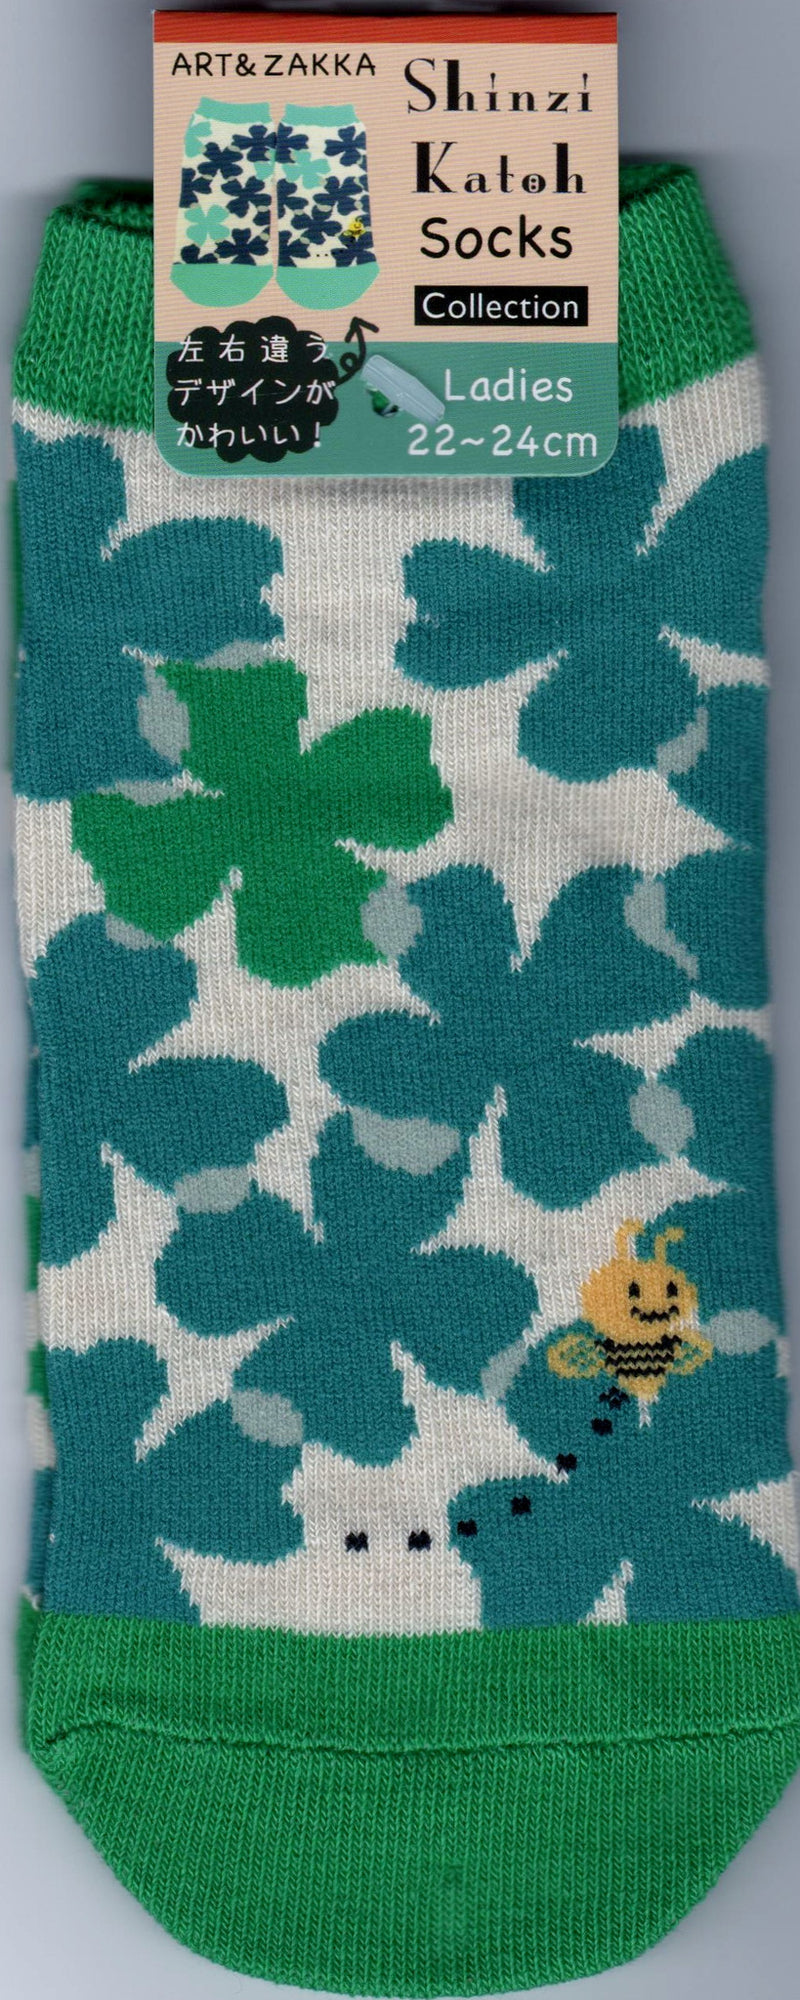 Actual Sock from Scan to show colors of Blue and Greens with Yellow and Black Bee.